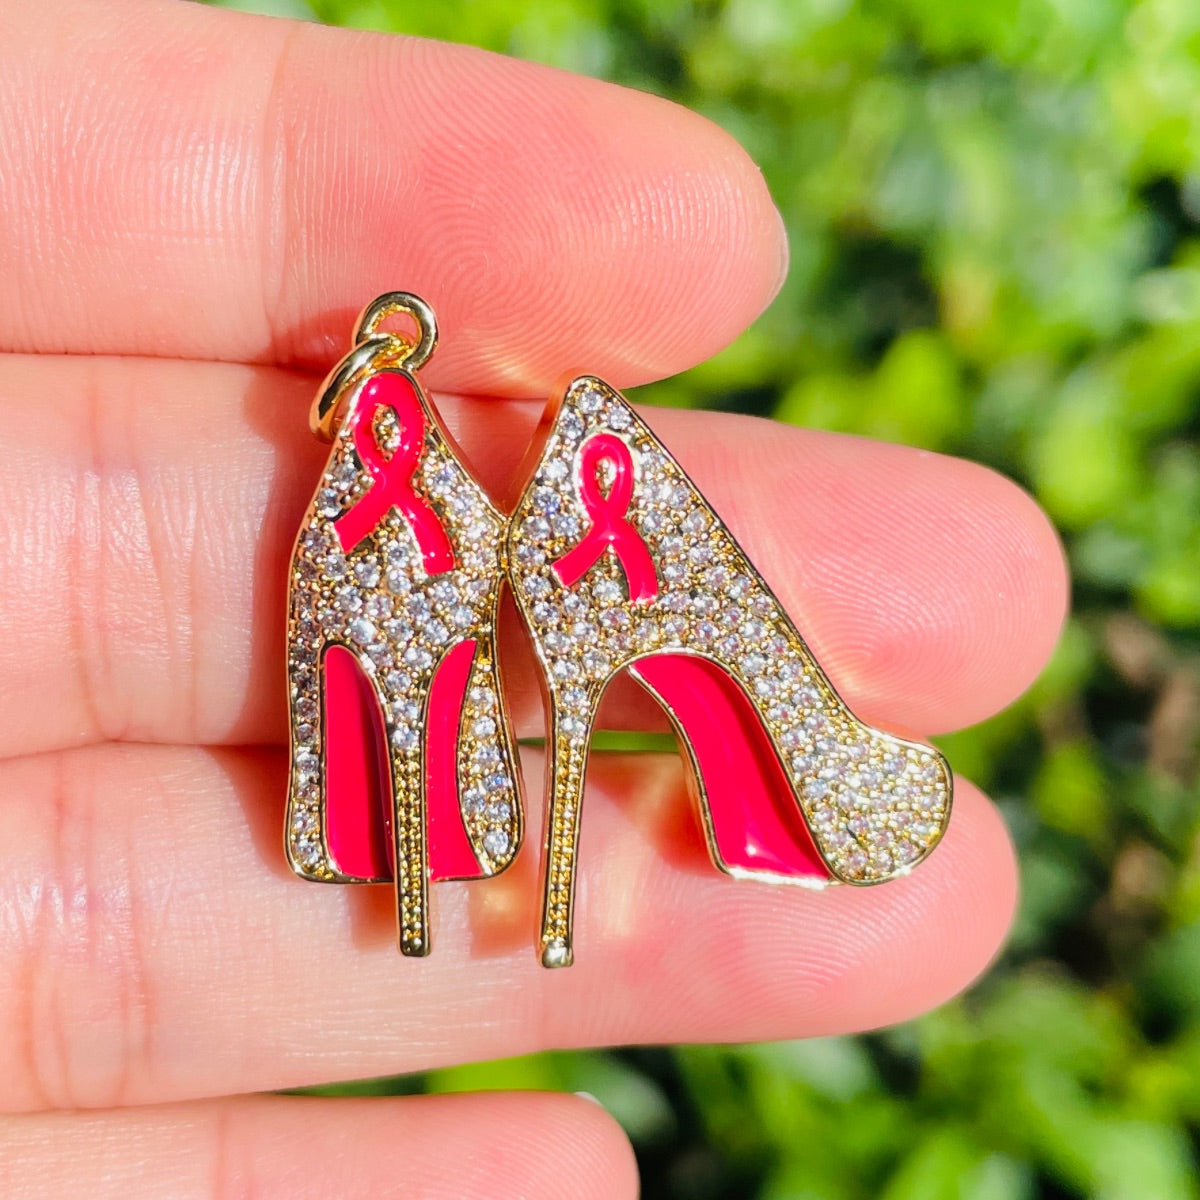 10pcs/lot CZ Pave Pink Ribbon High Heels Charms - Breast Cancer Awareness CZ Paved Charms Breast Cancer Awareness High Heels New Charms Arrivals Charms Beads Beyond